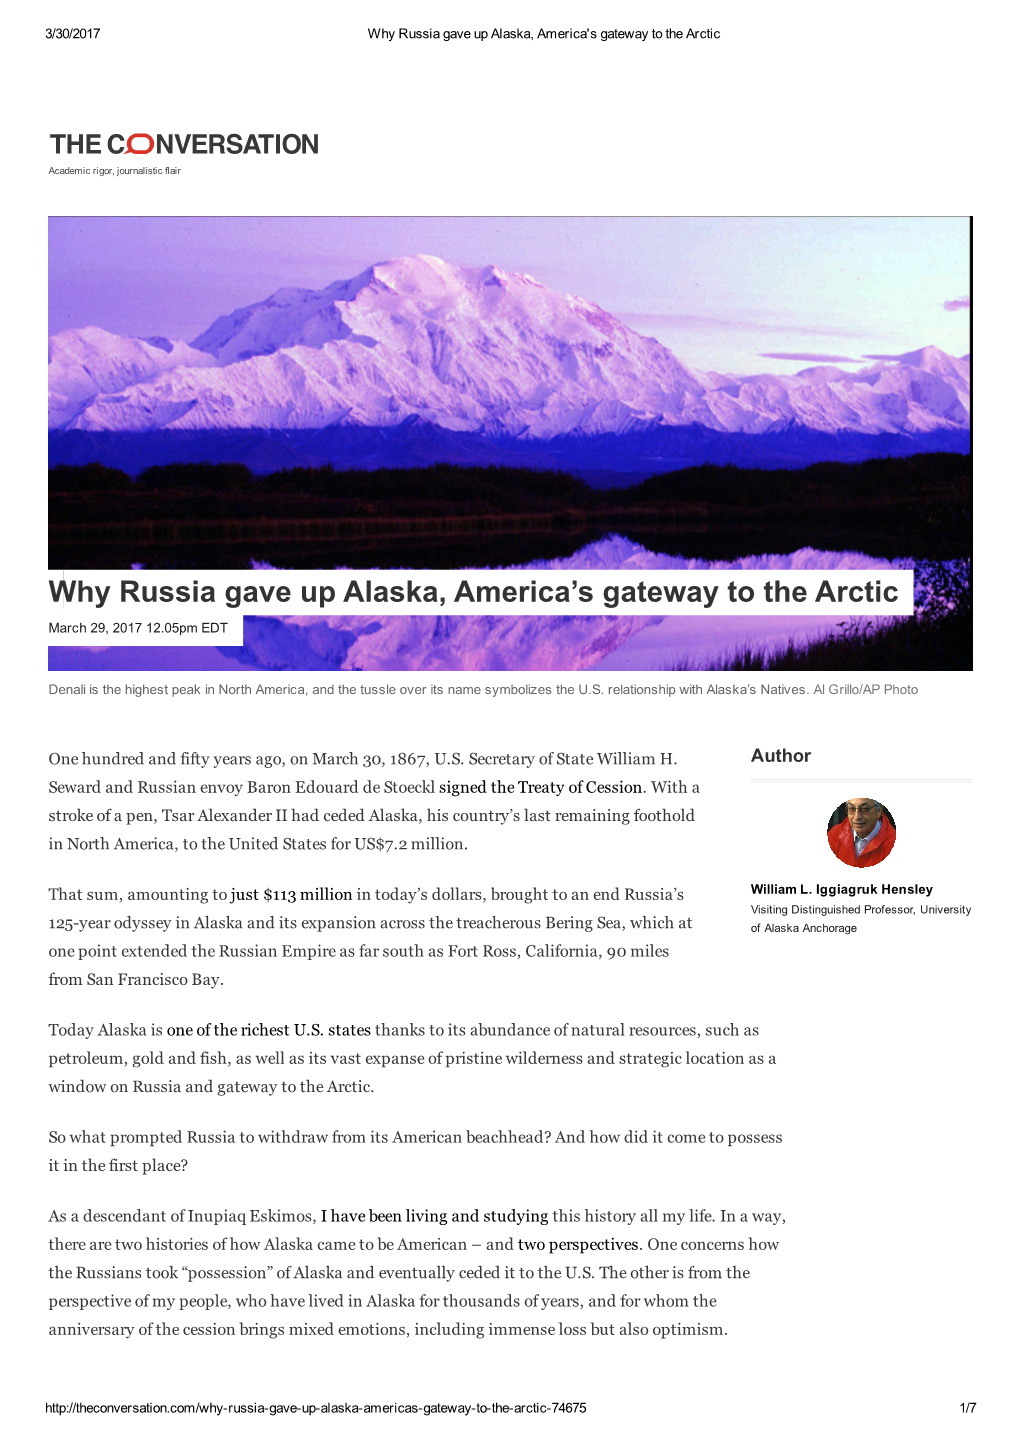 Why Russia Gave up Alaska, America's Gateway to the Arctic